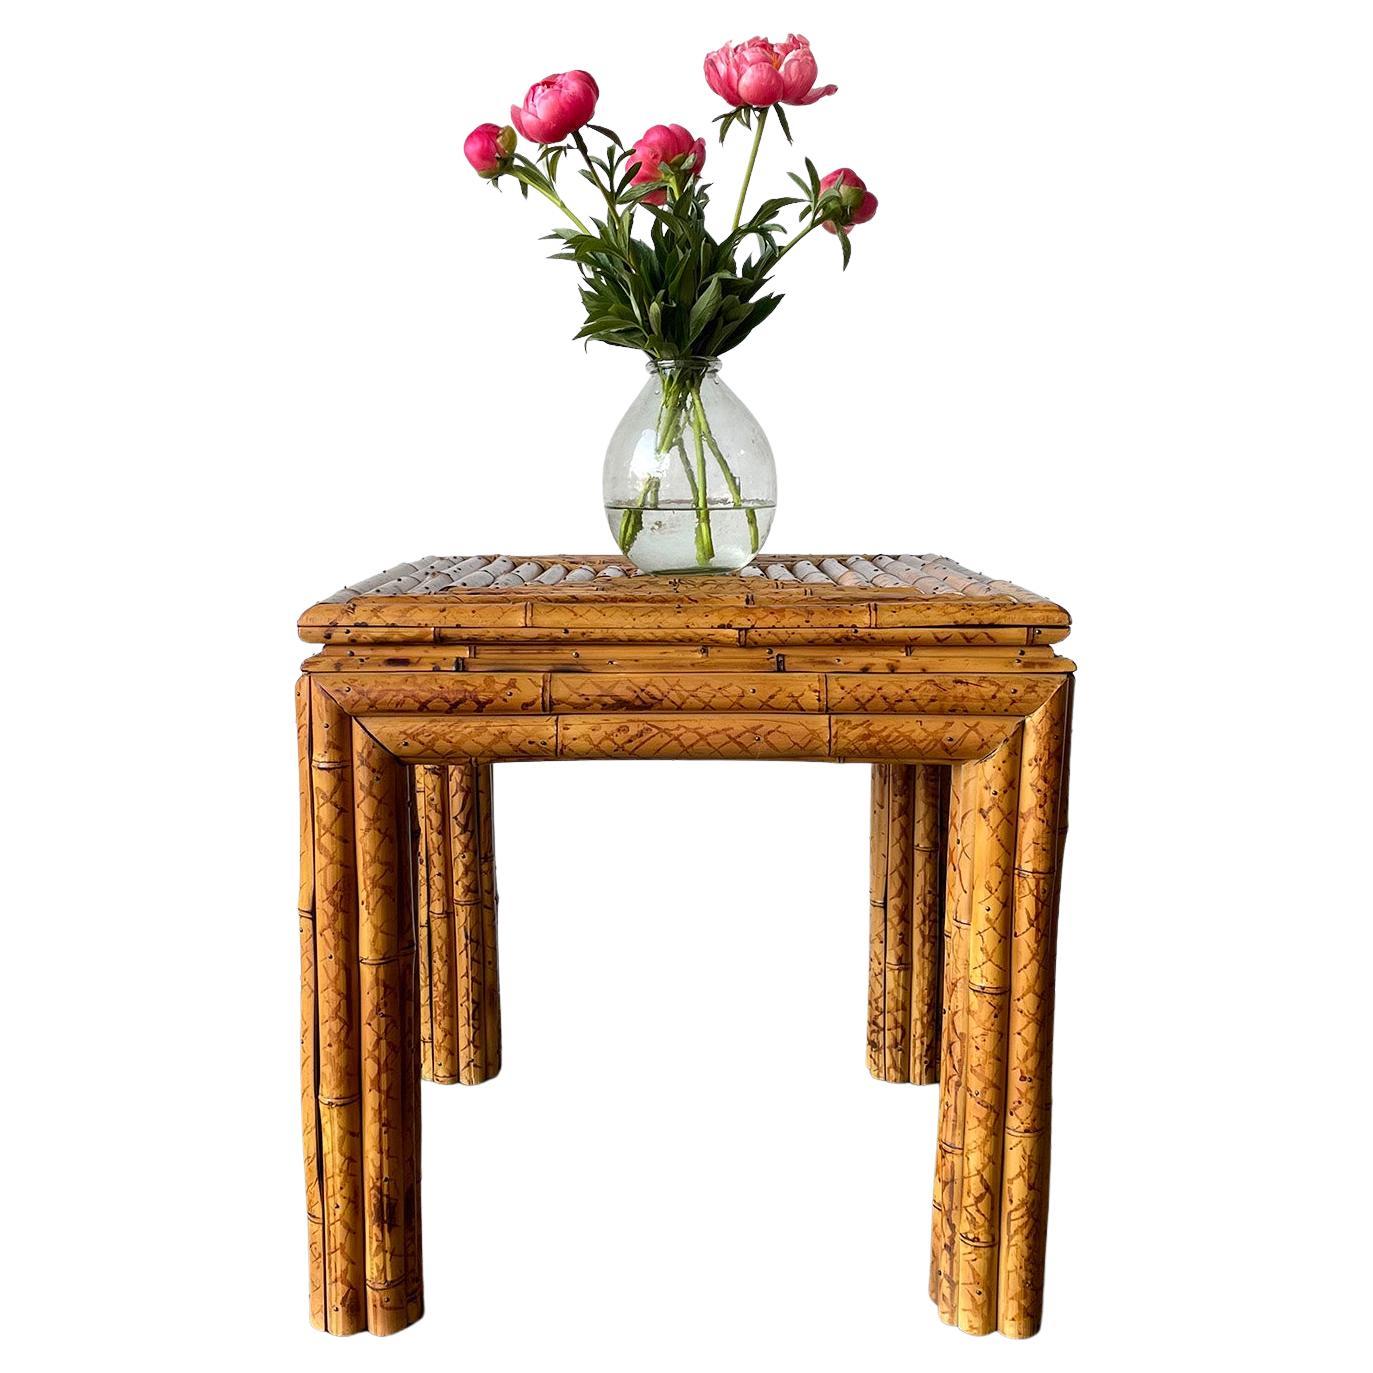 Split Bamboo Table For Sale